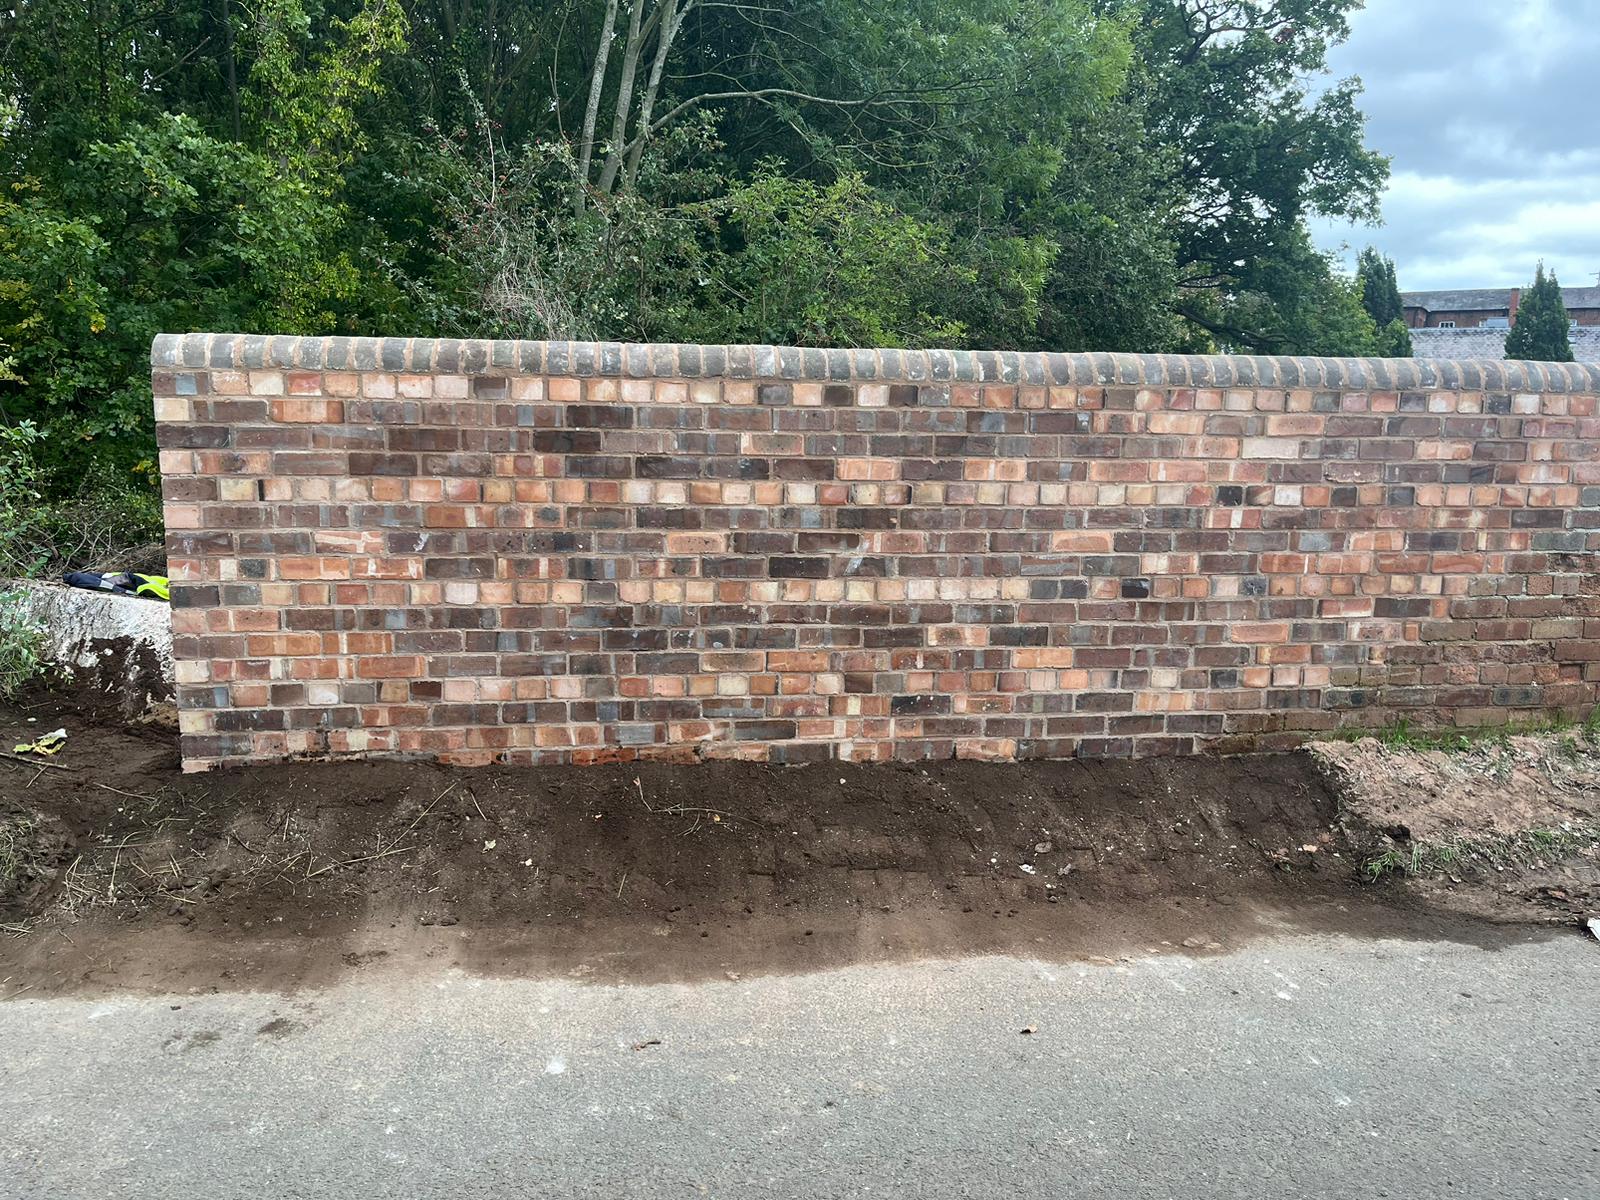 Wall as seen from road